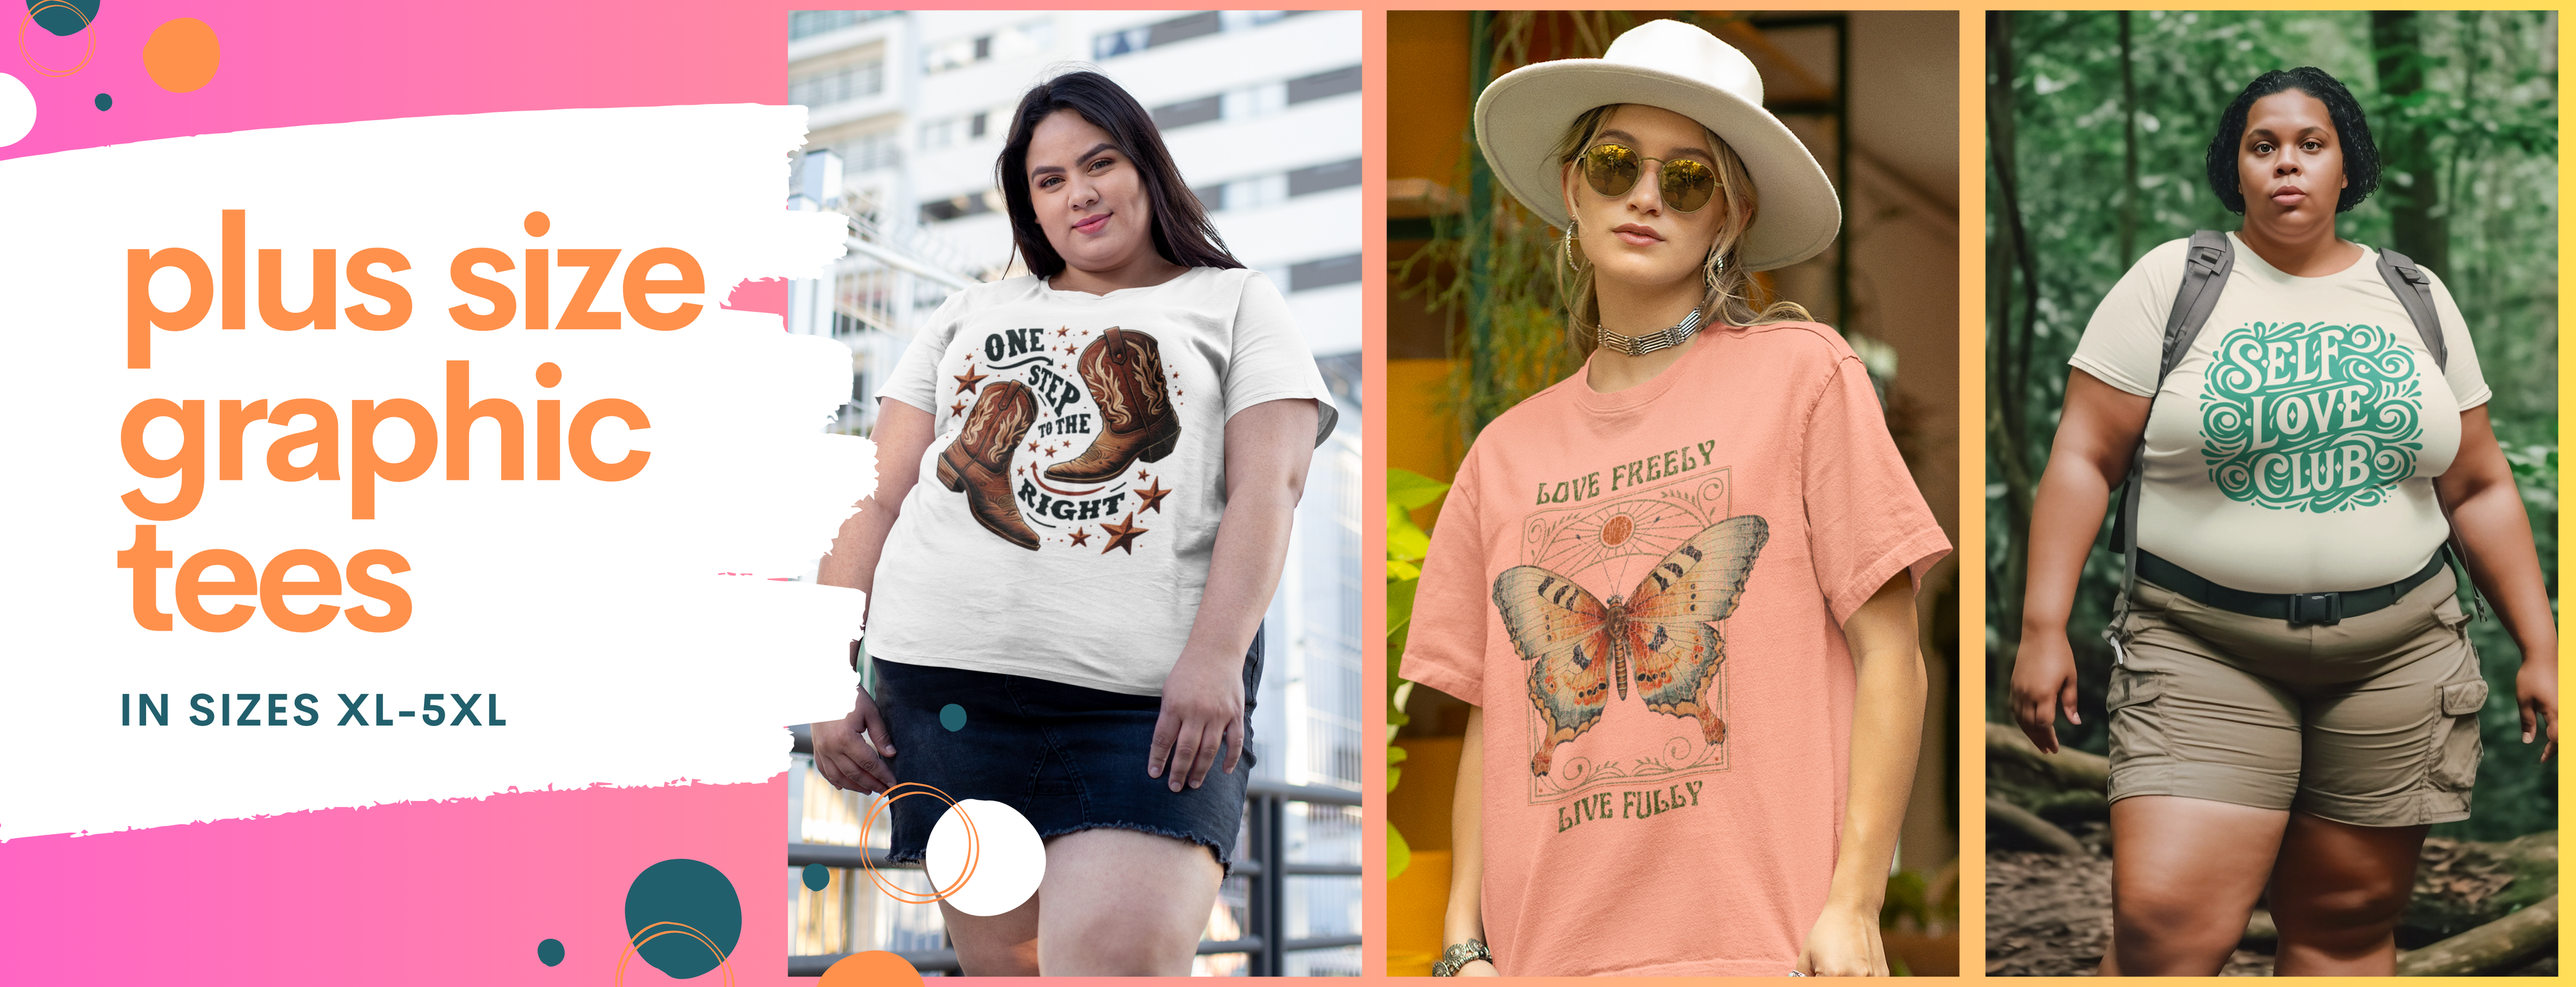 A collage of three women wearing plus size graphic tees